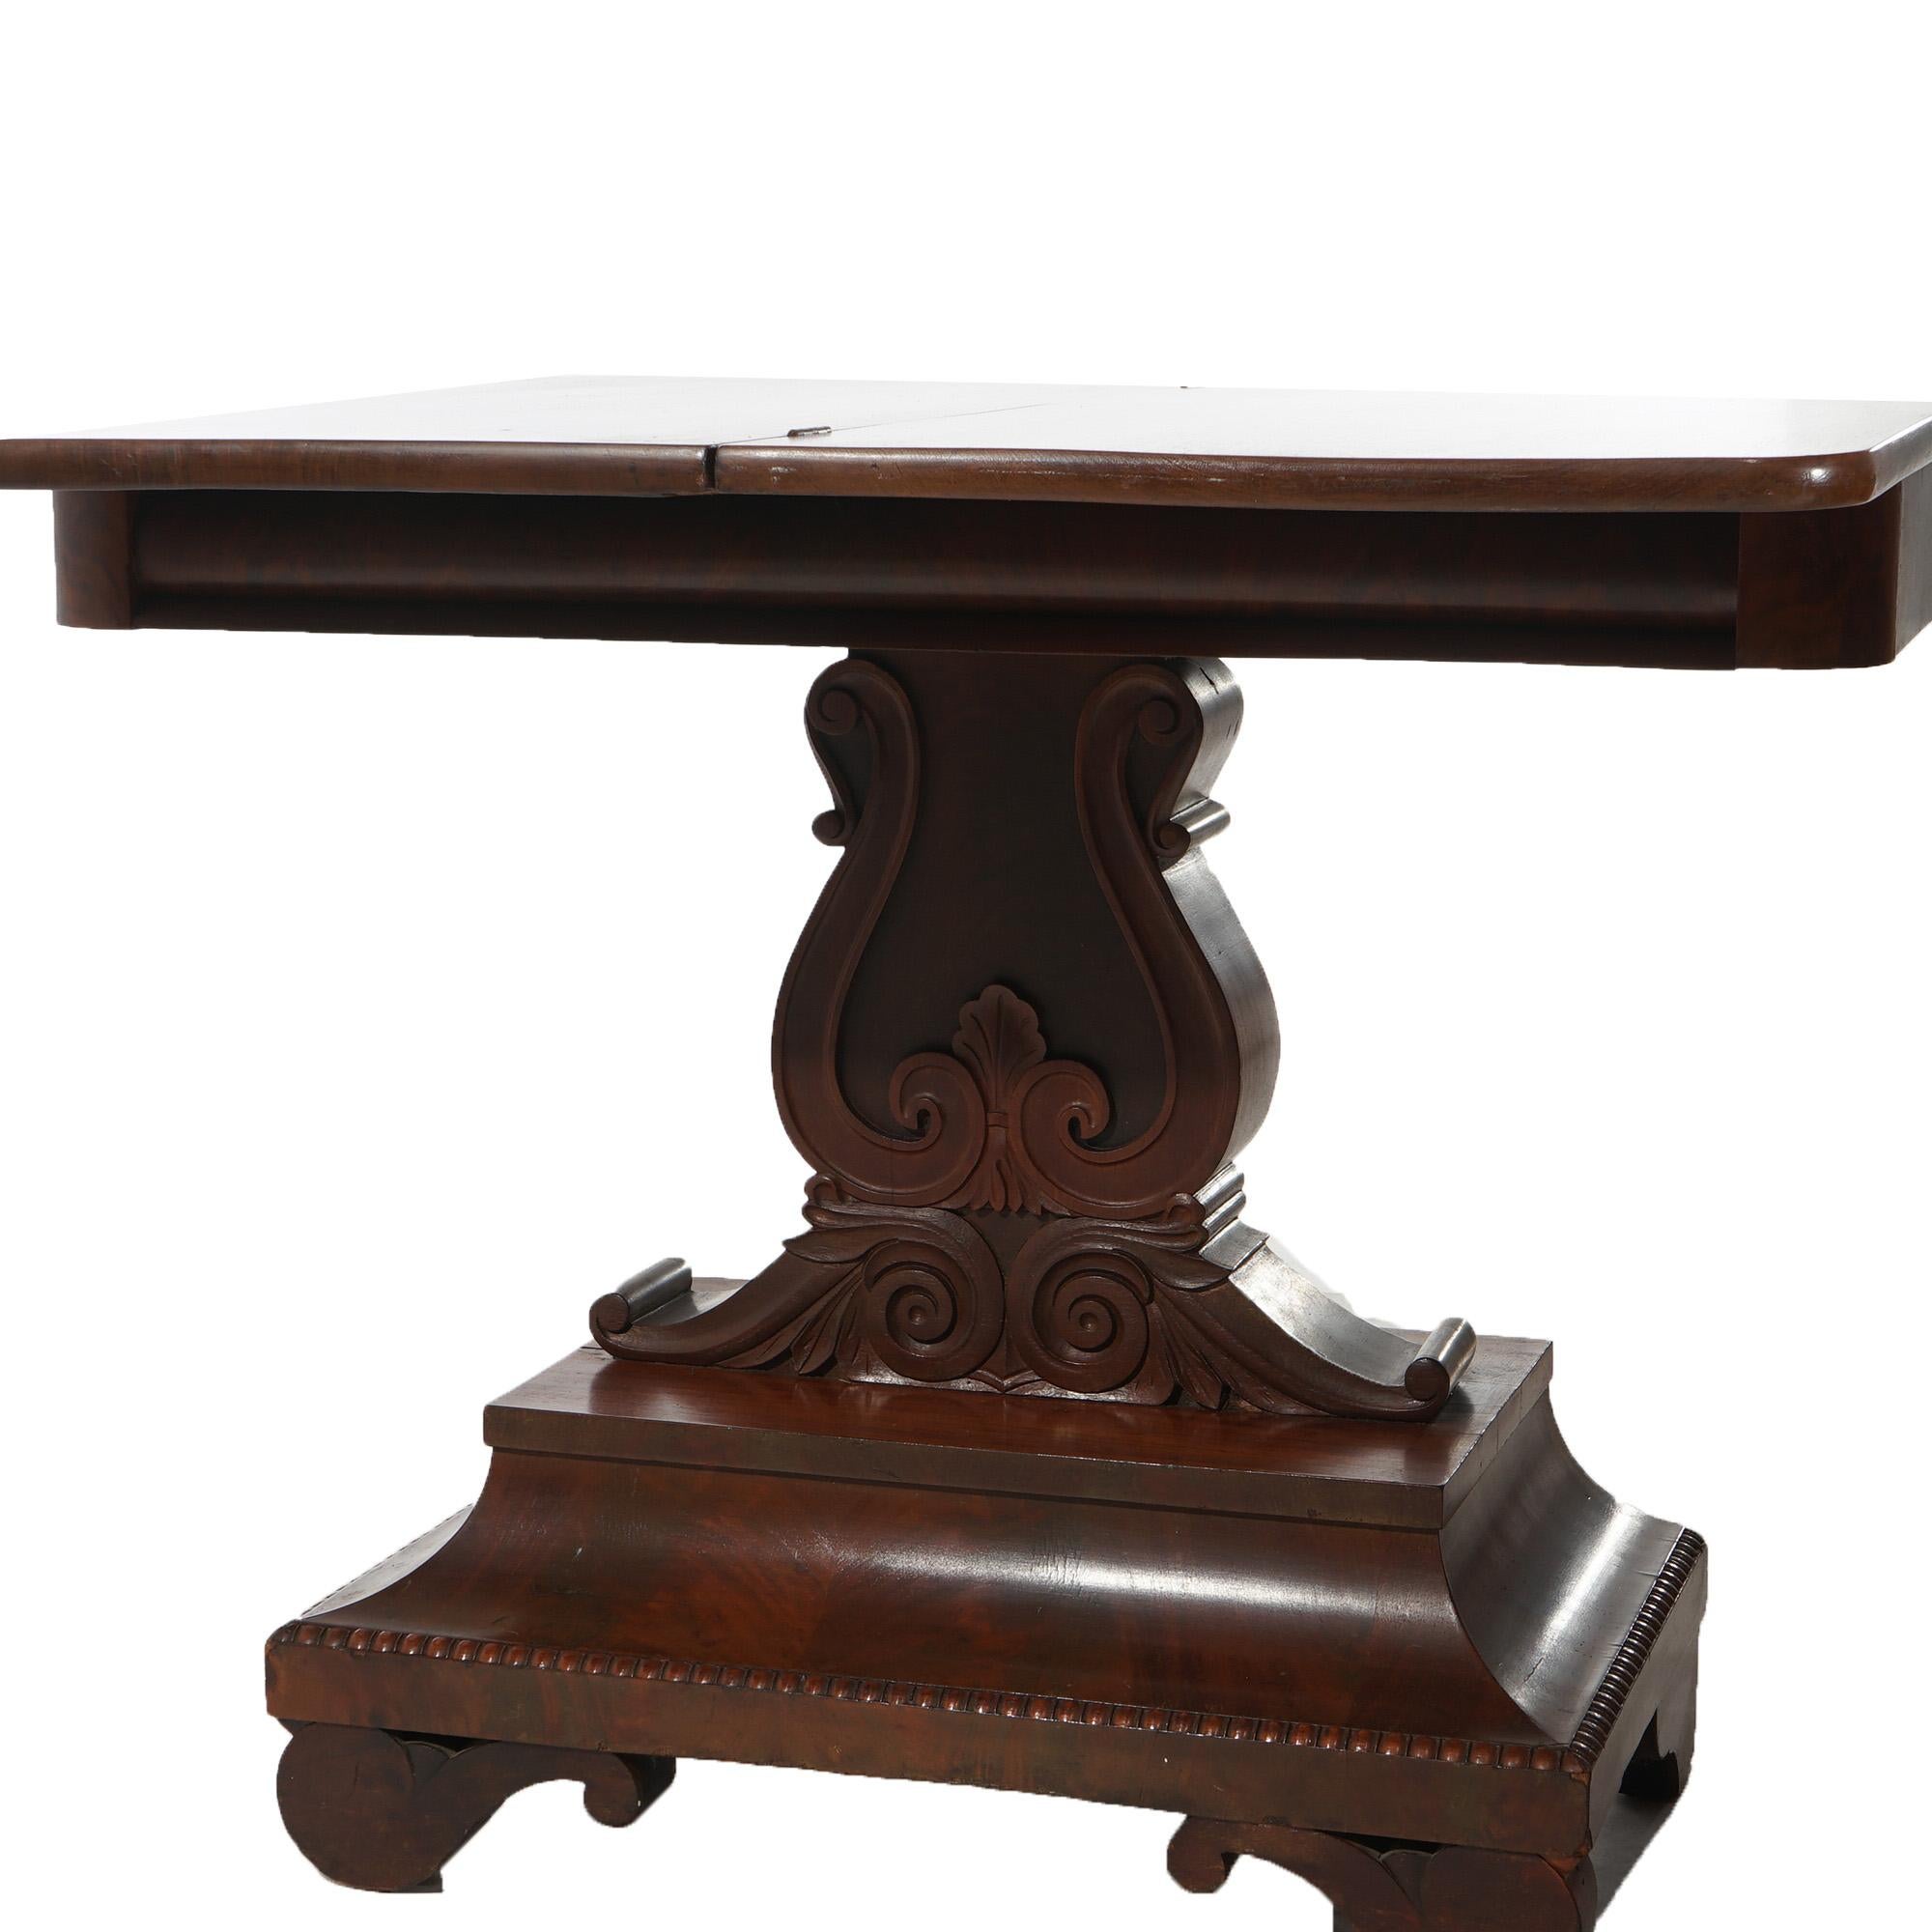 ***Ask About Reduced In-House Delivery Rates - Reliable Professional Service & Fully Insured***
Antique American Empire Neoclassical Greco Flame Mahogany Card Table with Ogee Top and Raised on Urn Form Pedestal C1840

Measures- 29.75''H x 35.75''W x